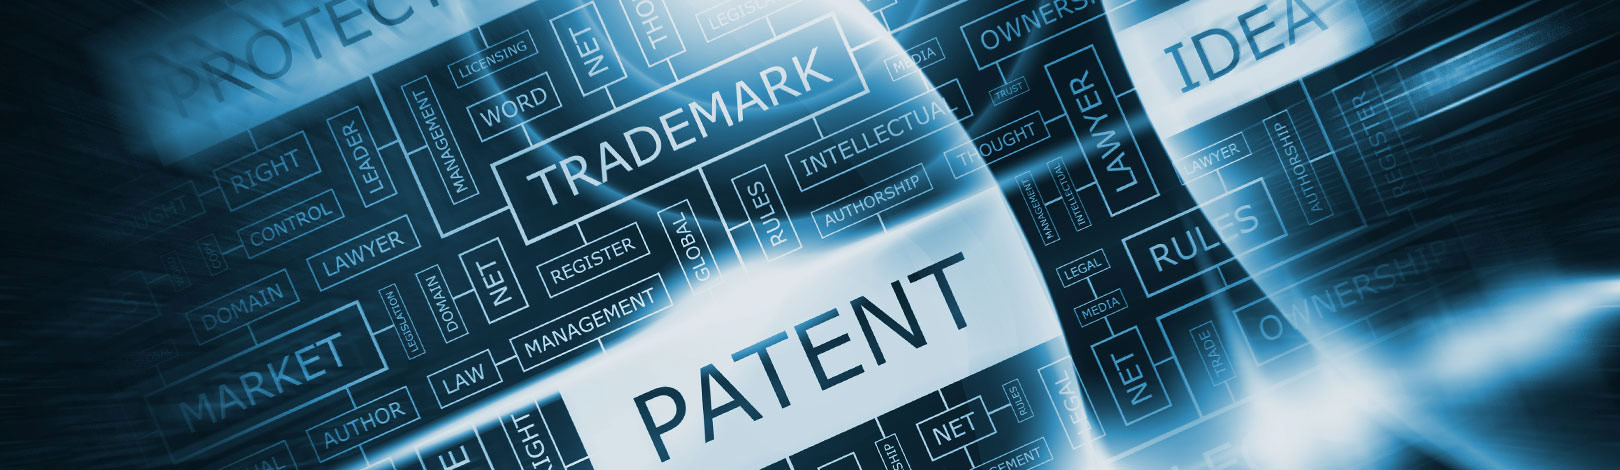 Patent and Trademark